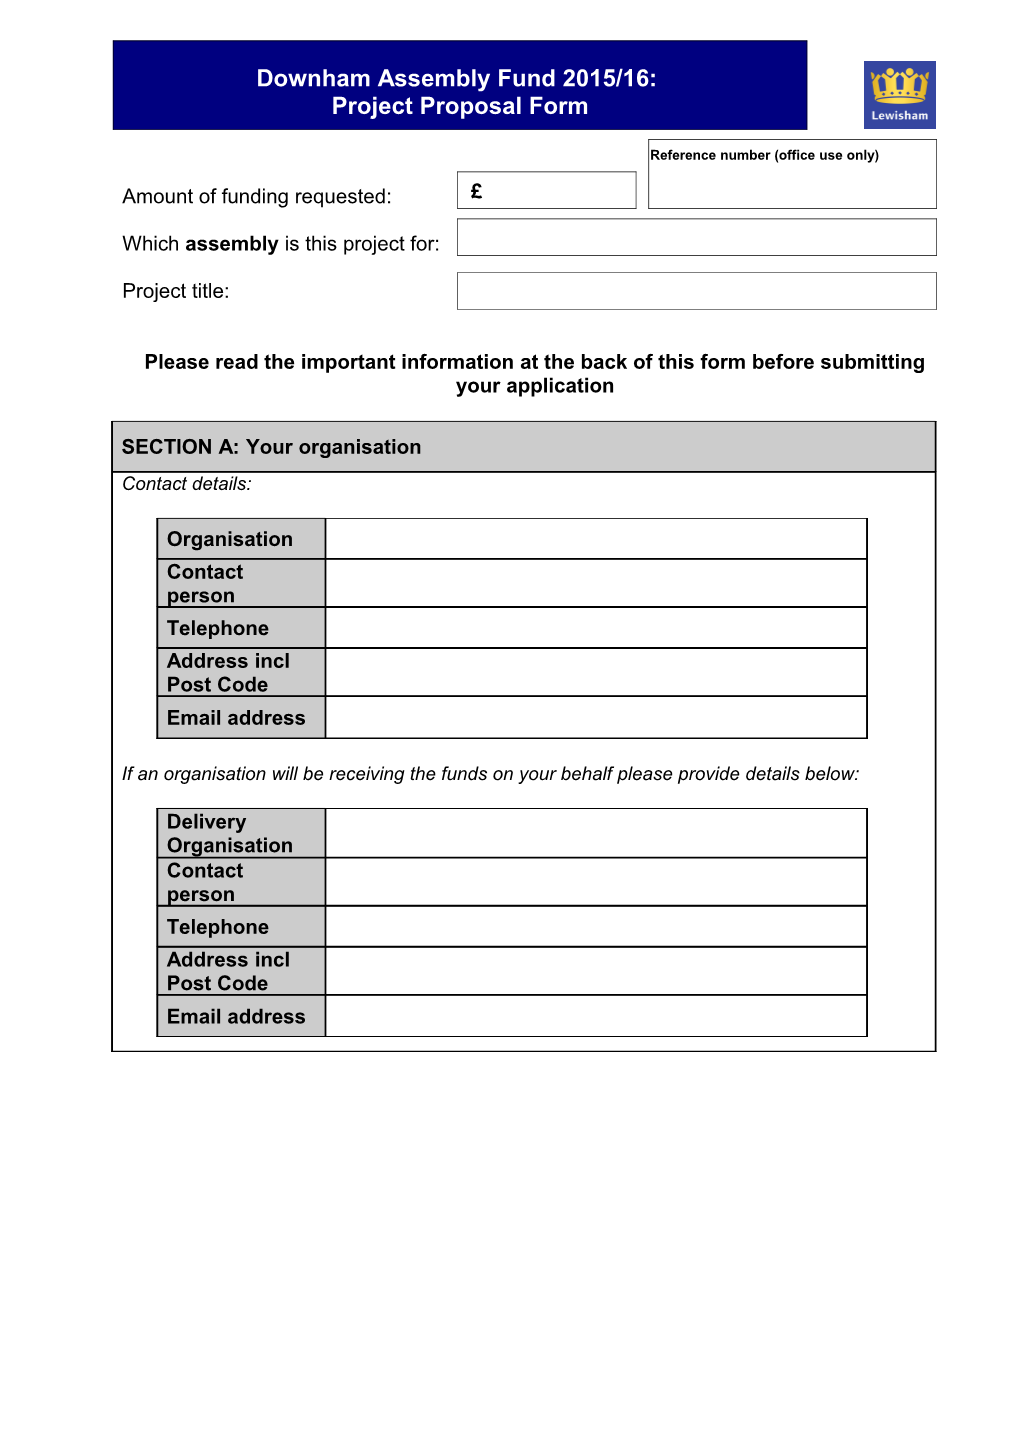 Downham Assembly Project Proposal Form